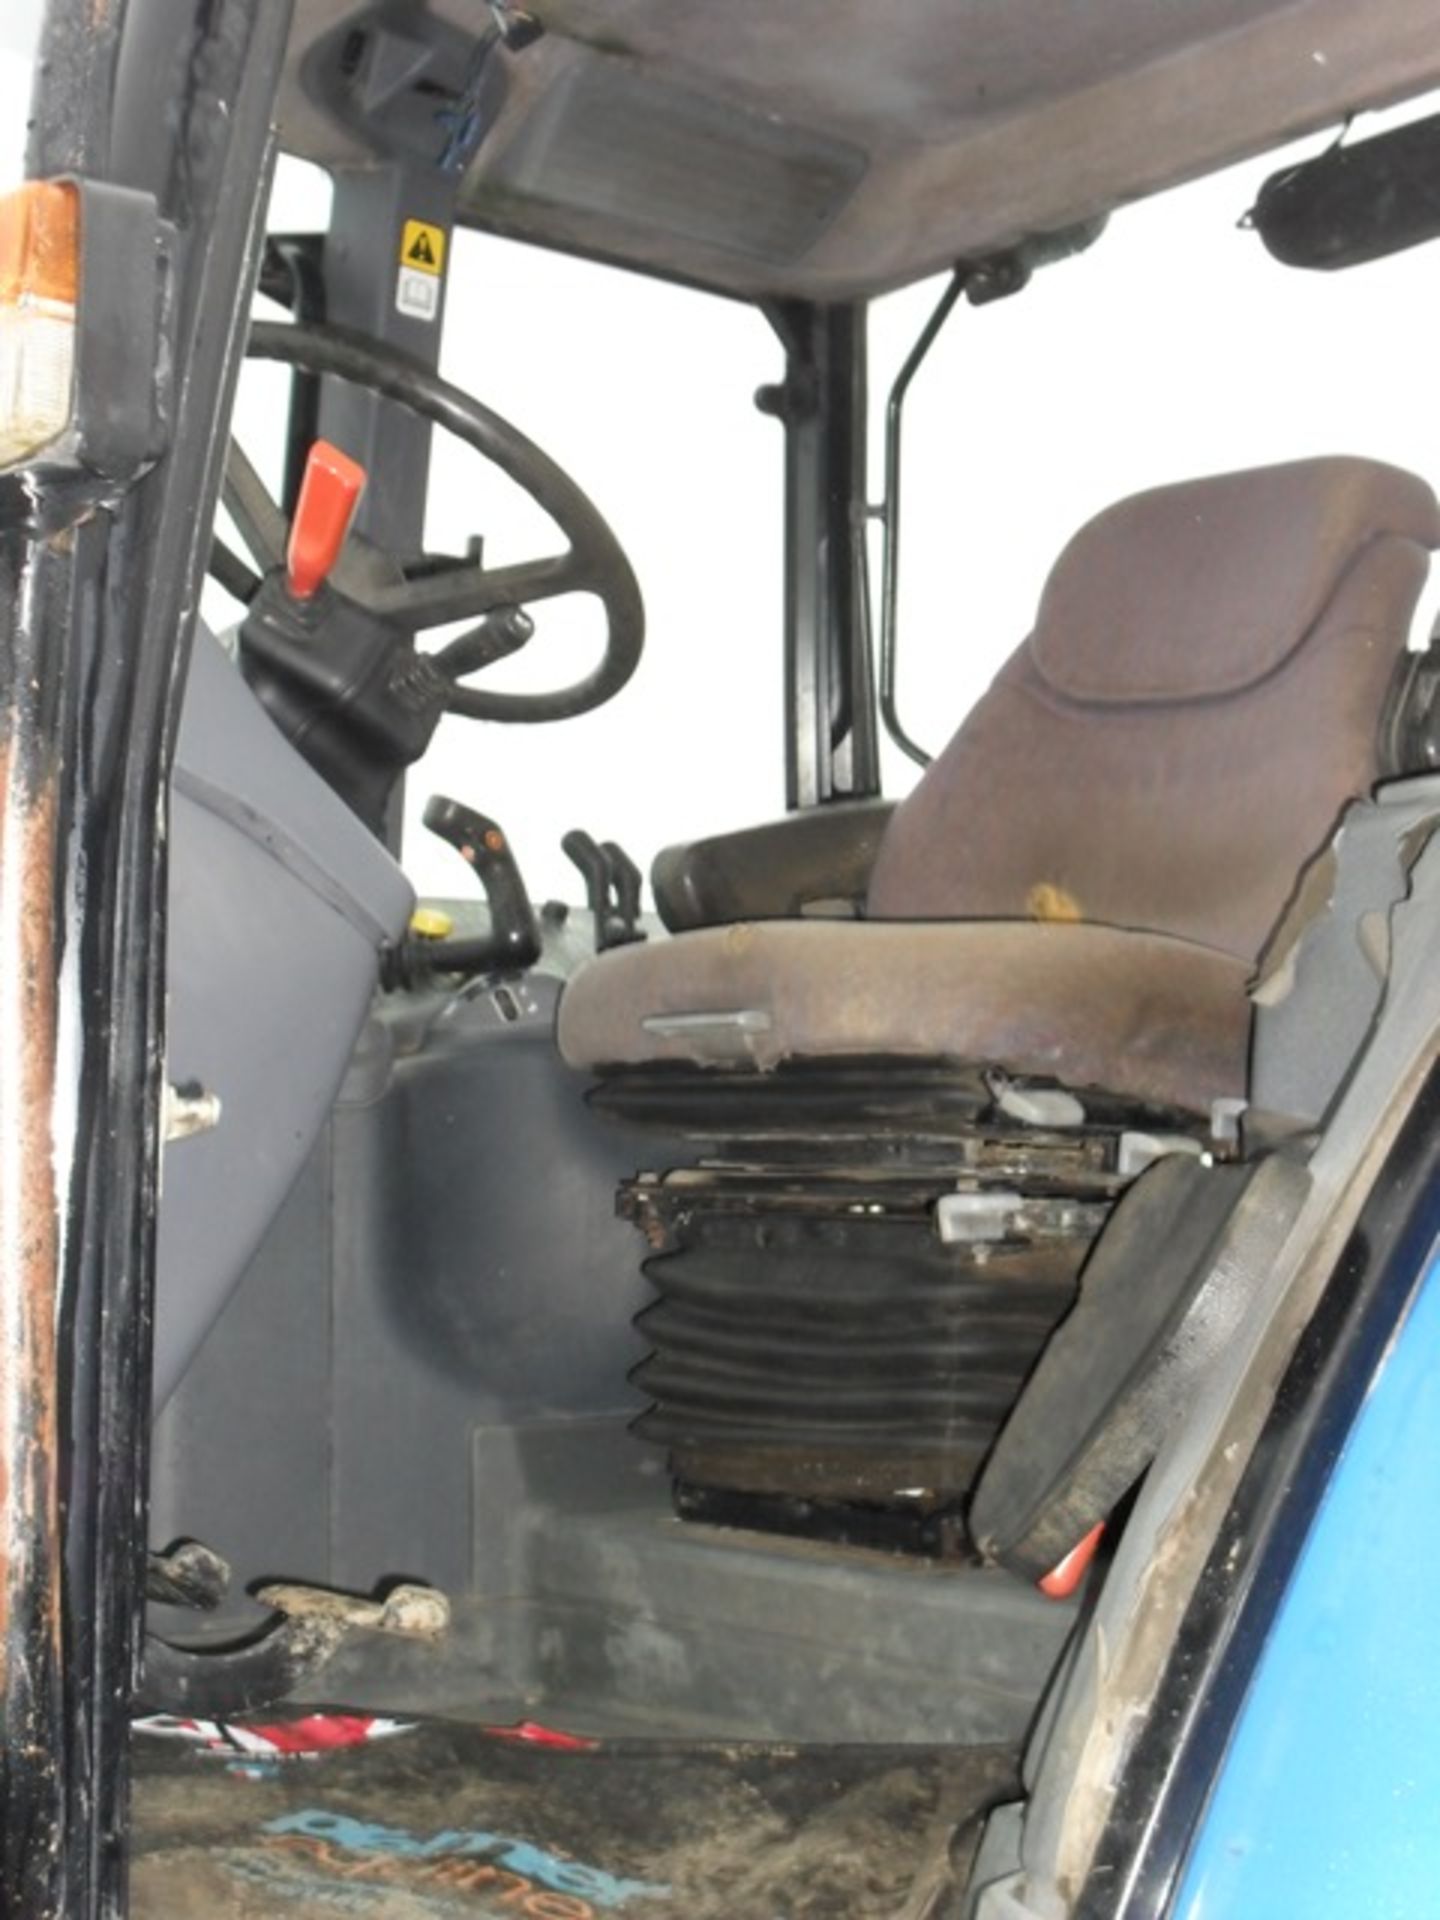 New Holland TM135, 40k Range Command, air con, air seat, Front linkage, 4 spools, Registration no. - Image 6 of 6